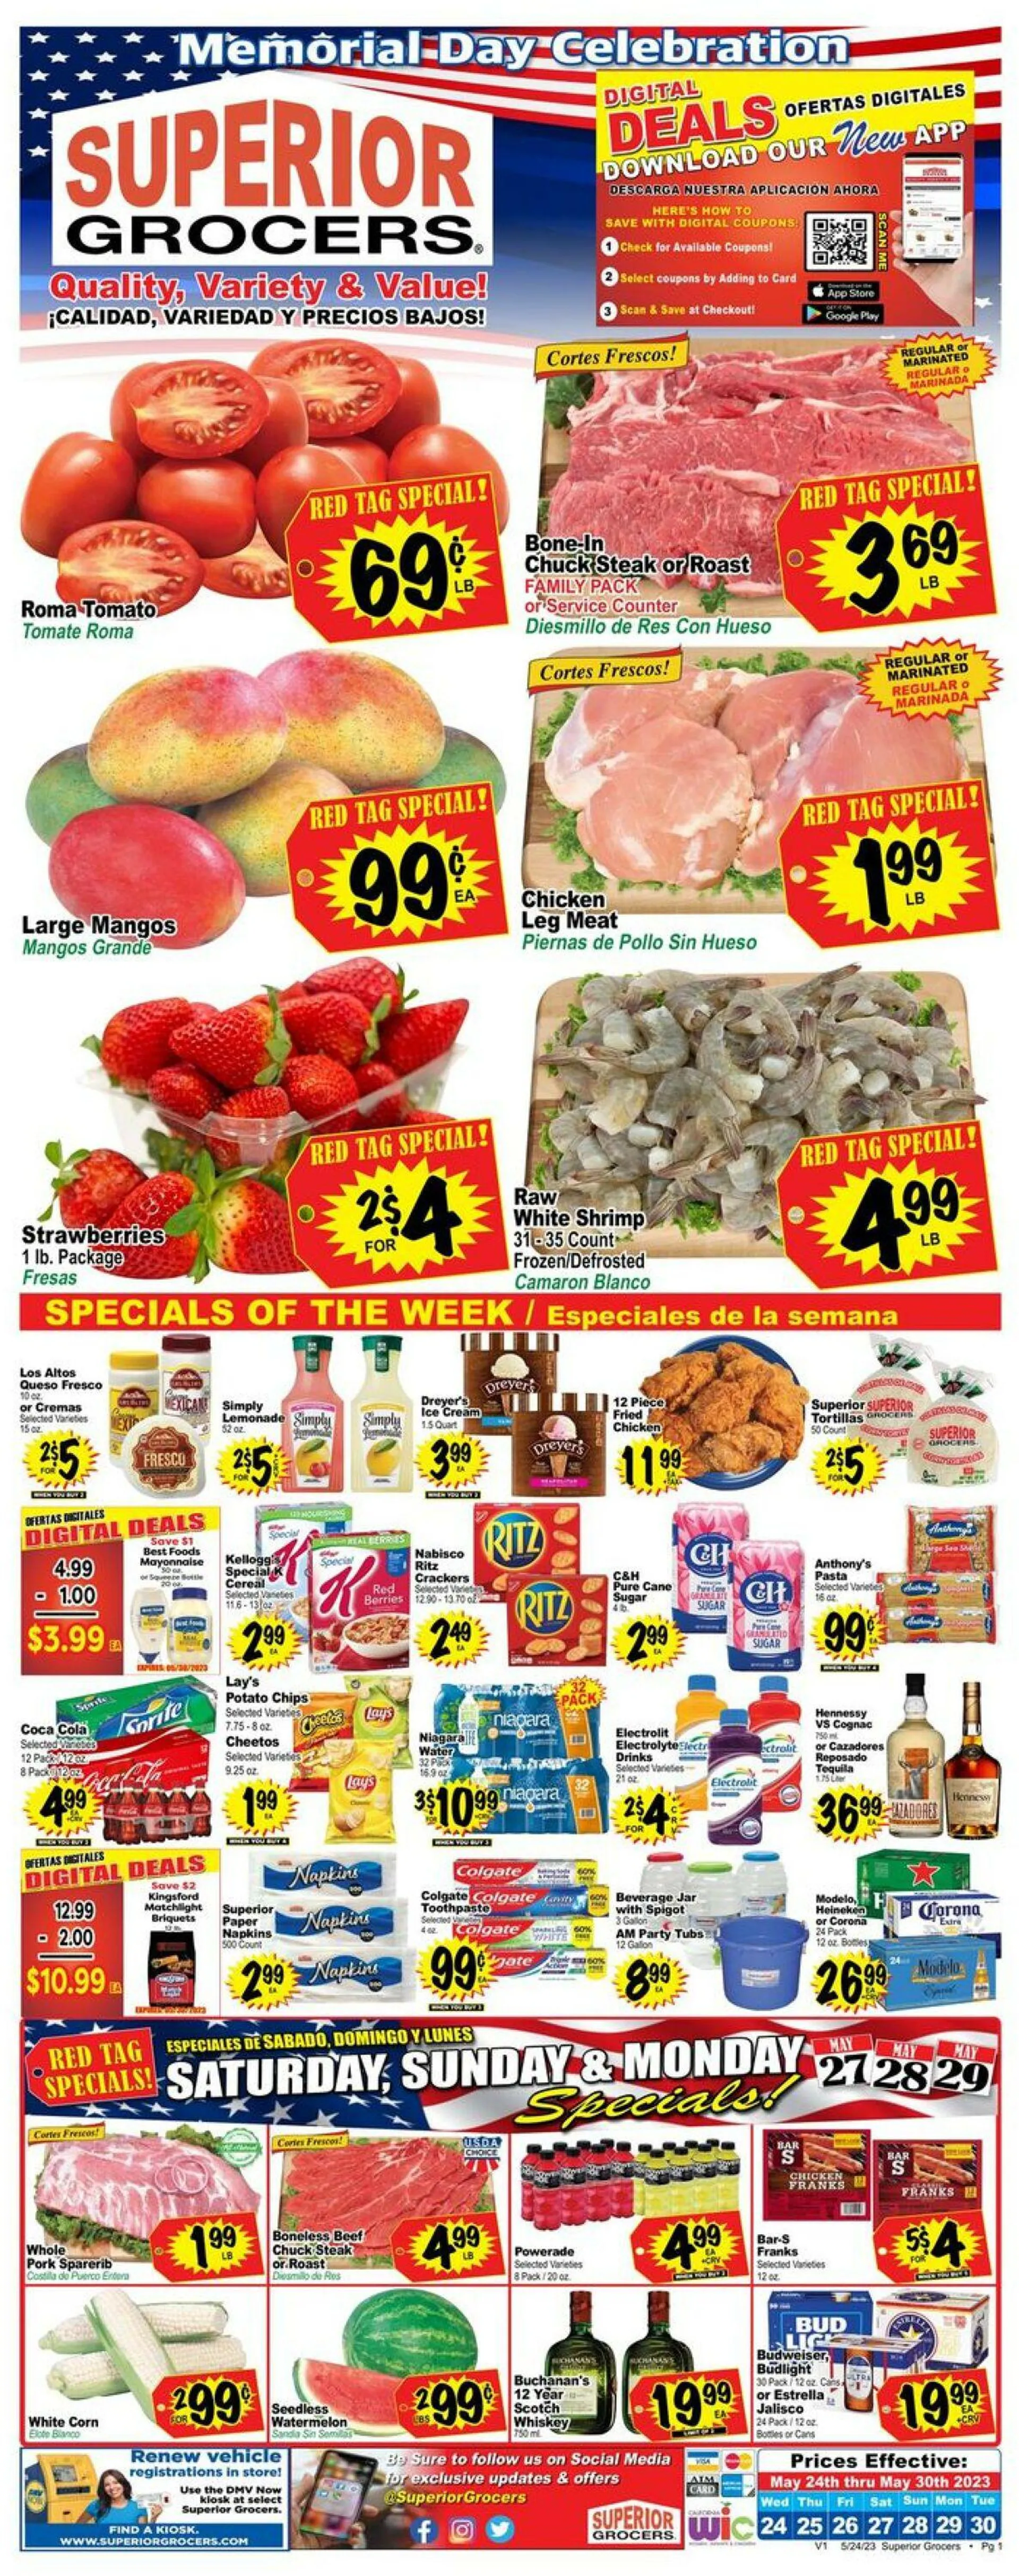 Superior Grocers Current weekly ad - 1